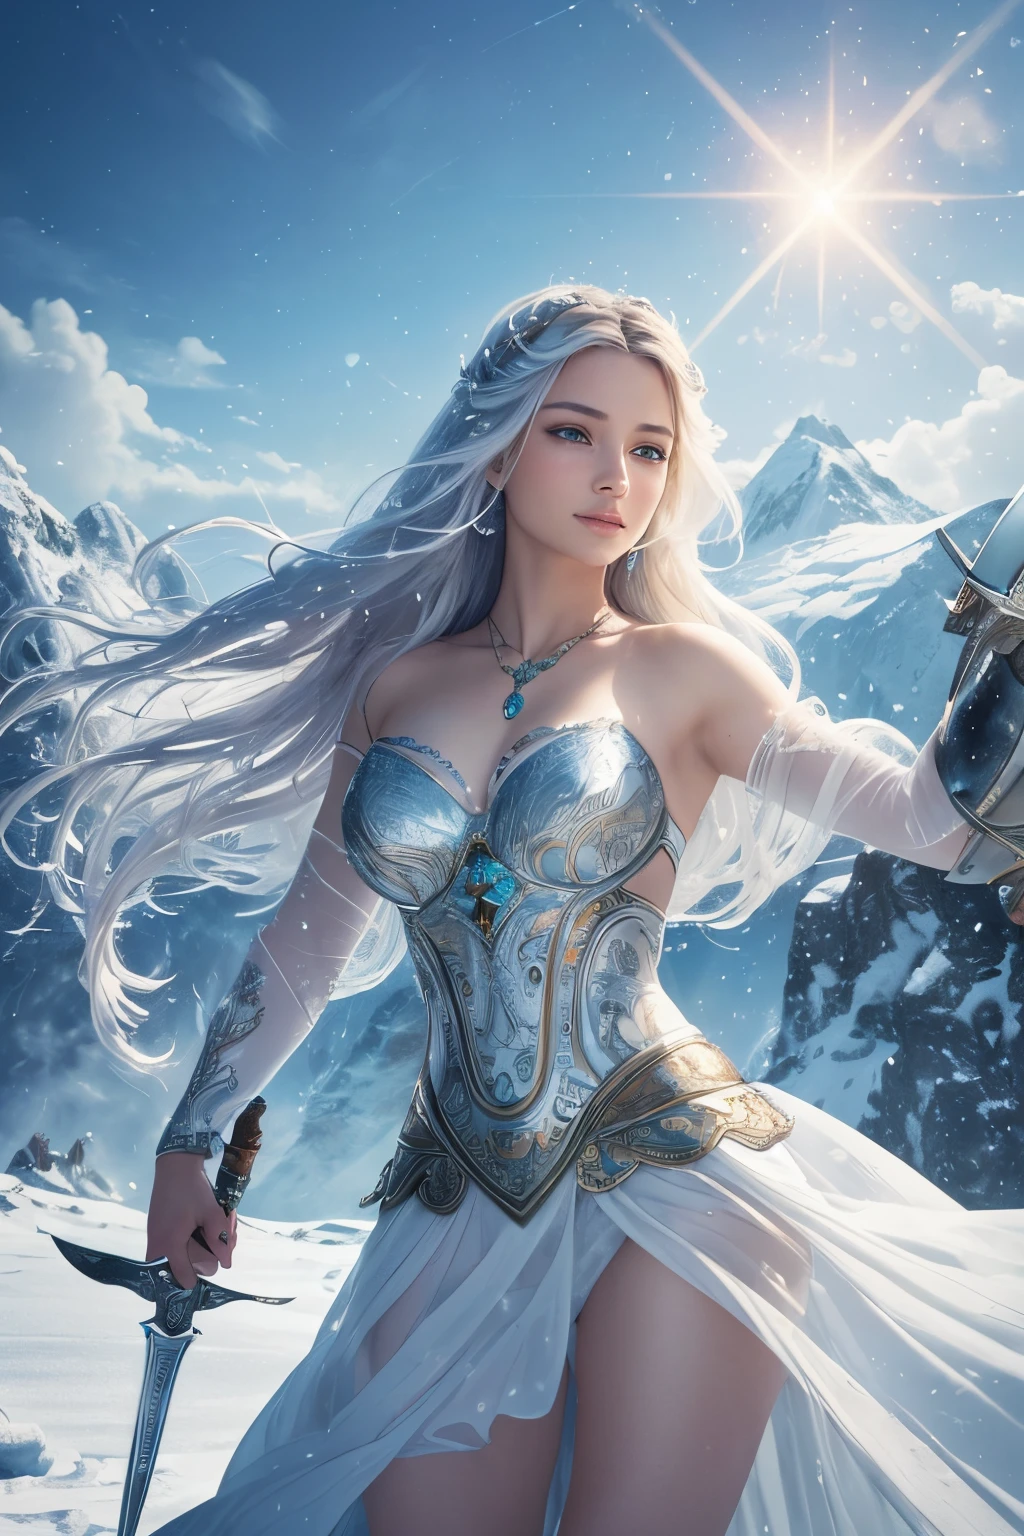 (best quality,4k,8k,highres,masterpiece:1.2), ultra-detailed, (realistic,photorealistic,photo-realistic:1.37), a girl, snowy mountains, ancient style, cold icy flames, holding a sword, gripping a sword that burns with blue flames, dancing with a sword in the snow, wearing a white flowing dress, with long flowing hair, a beautiful woman holding a silver long sword, wearing emerald gemstones, her face is filled with confident smiles, she is floating among the clouds like a fairy, behind her are layers of mountains.